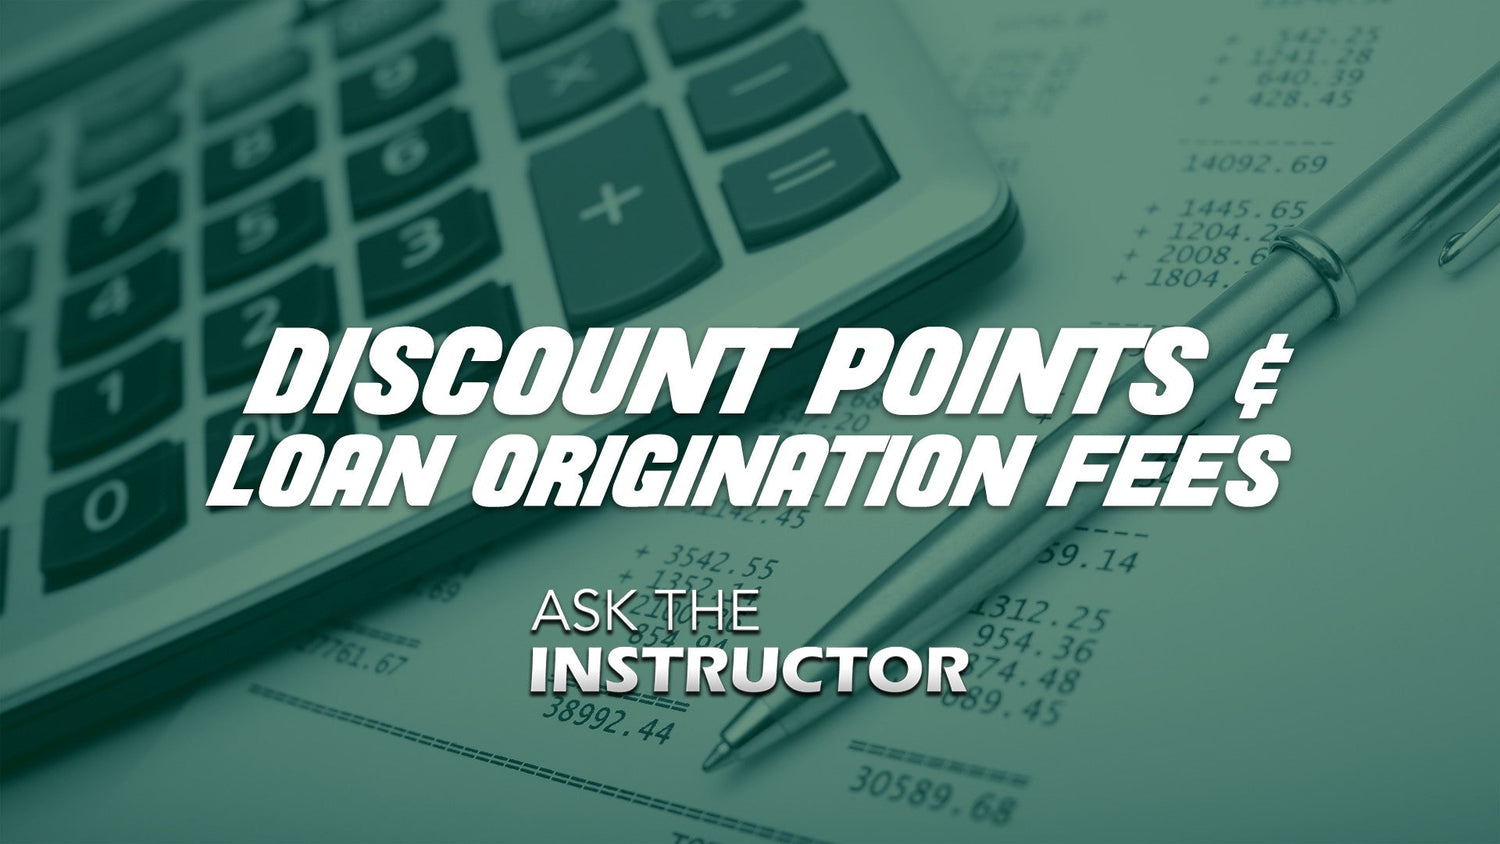 Calculating Discount Points and Loan Origination Fees